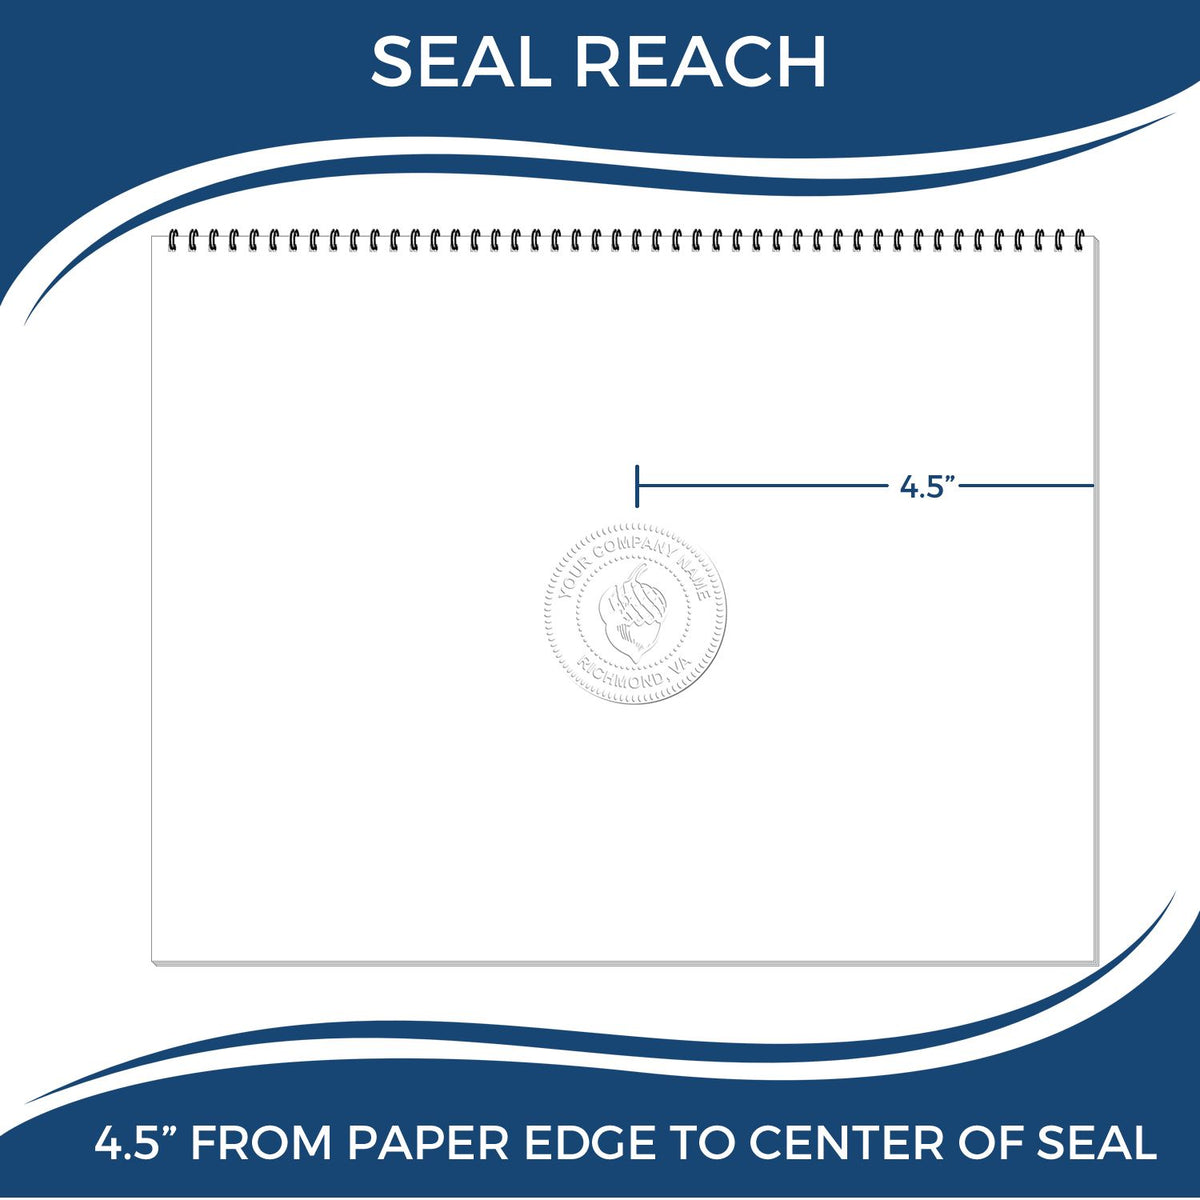 An infographic showing the seal reach which is represented by a ruler and a miniature seal image of the State of South Dakota Extended Long Reach Geologist Seal